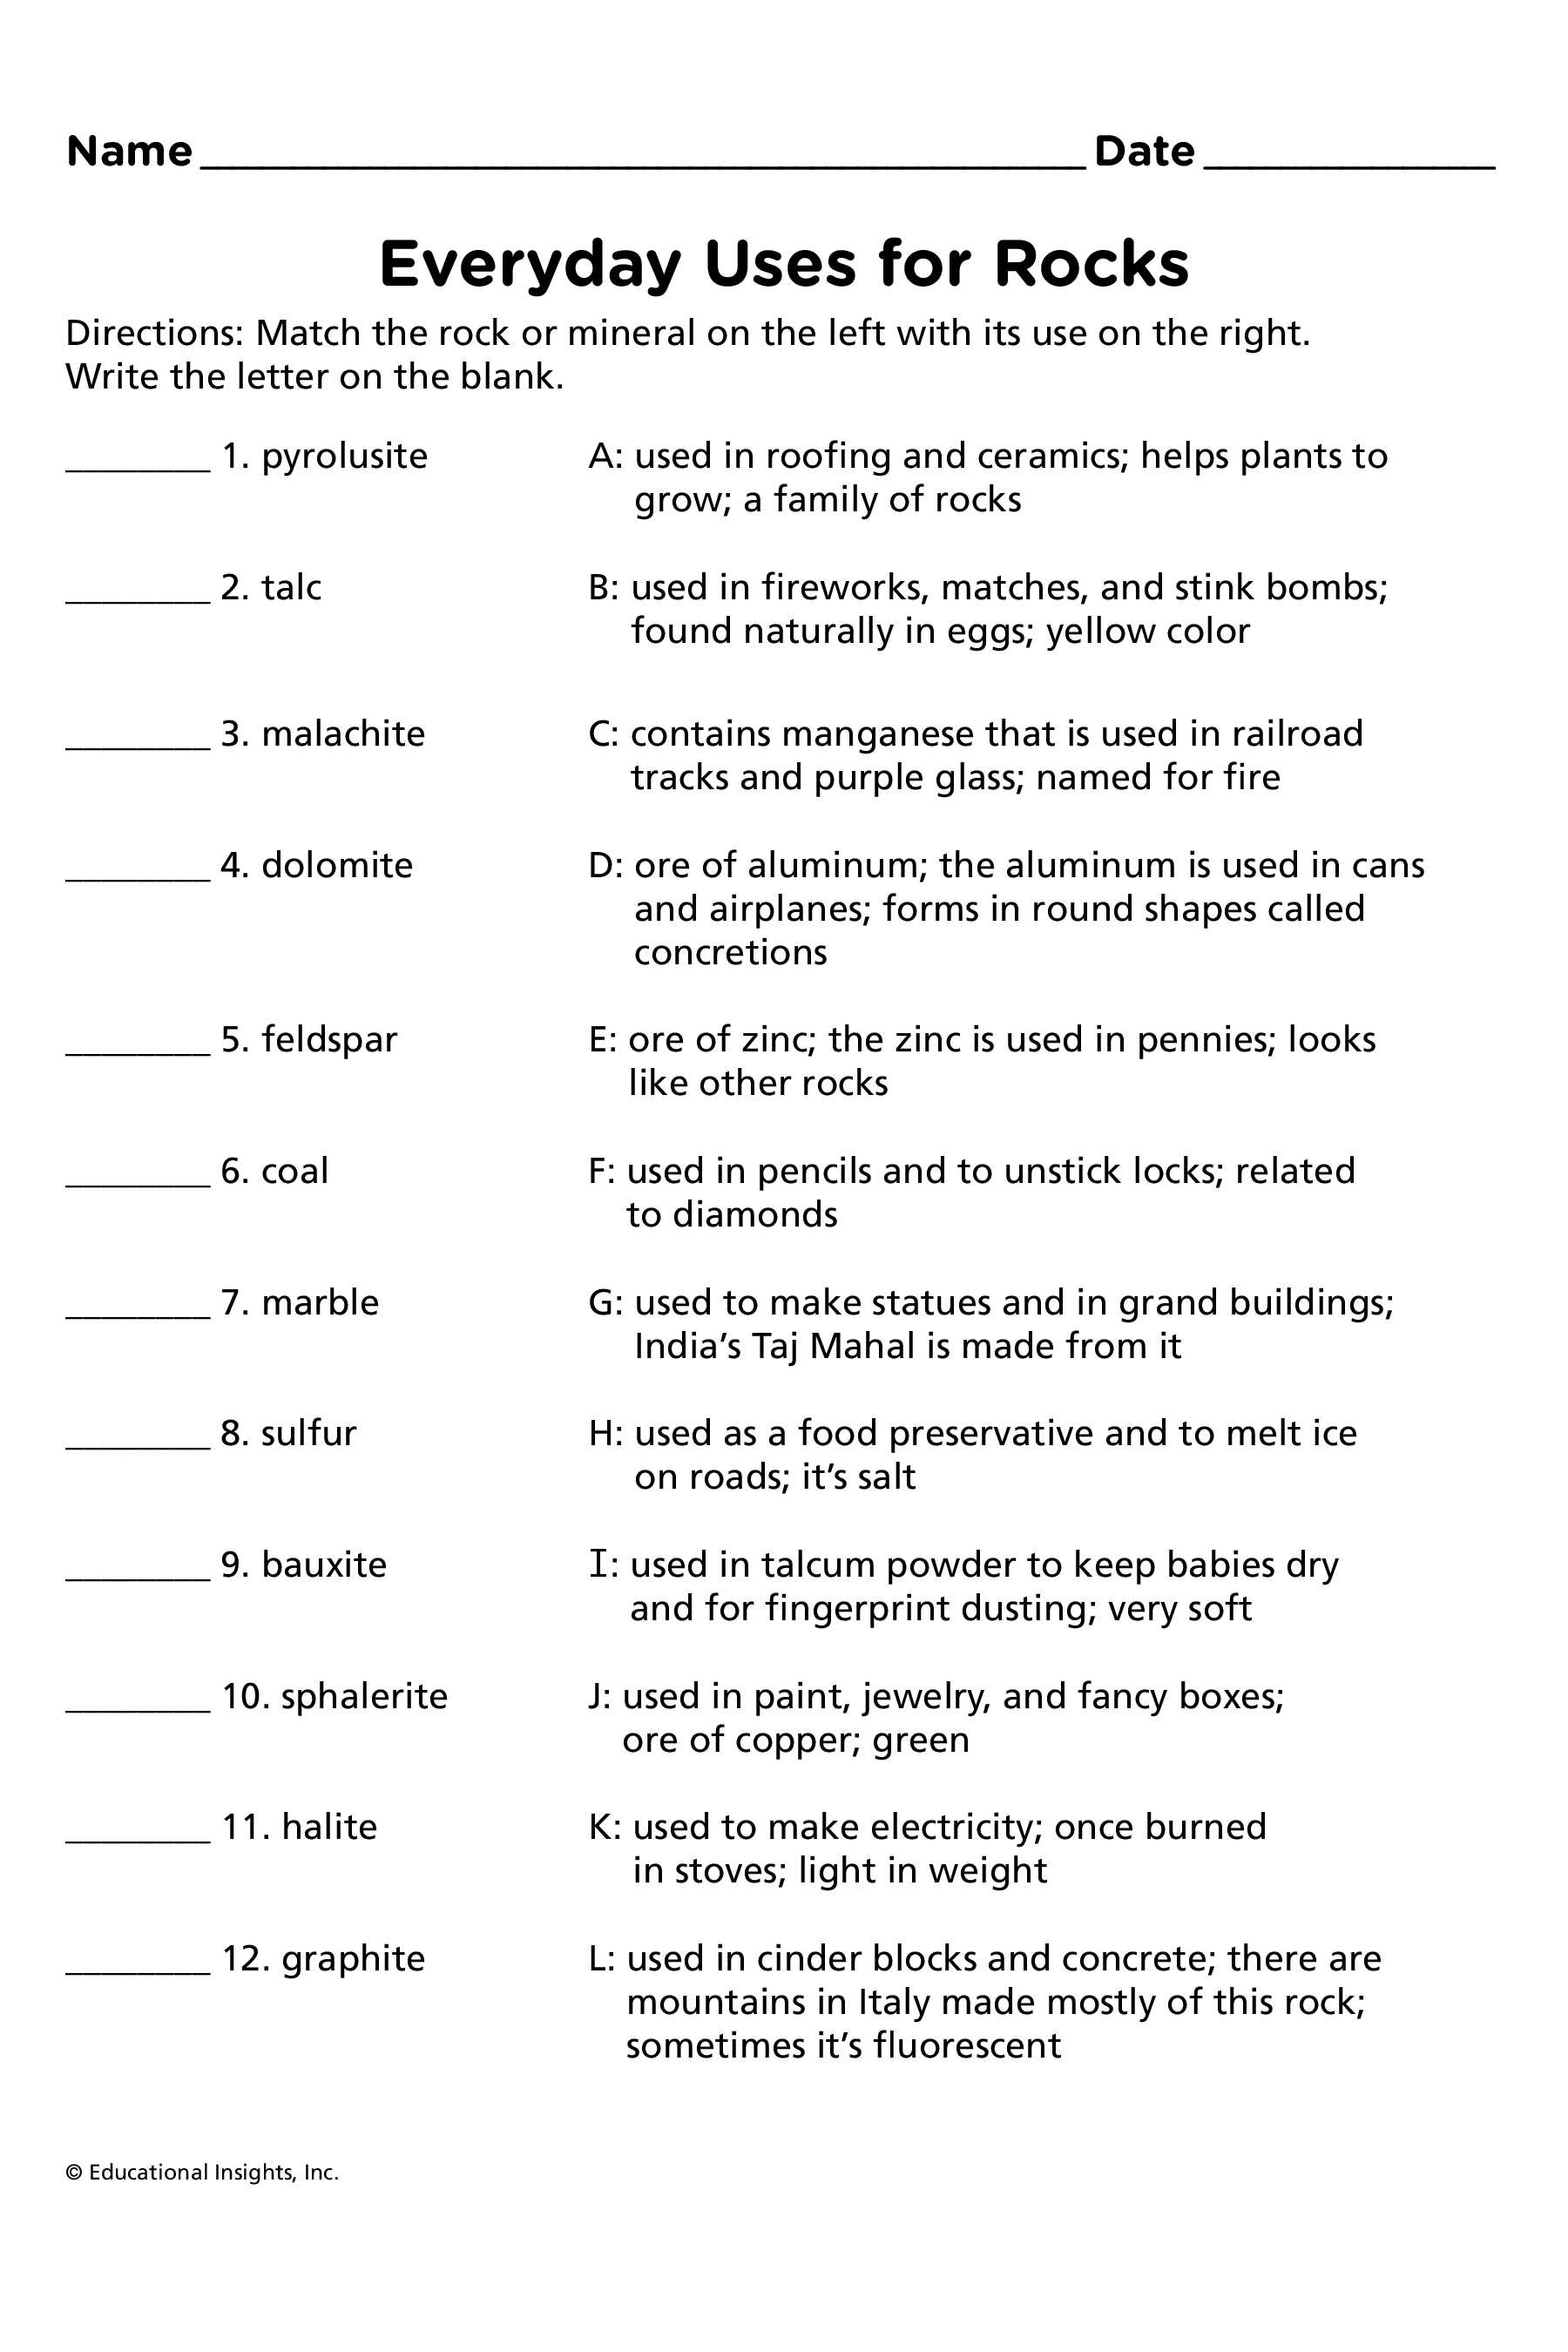 Skills Worksheet Directed Reading A Answer Key with Everyday Uses Rock & Card Set Pinterest